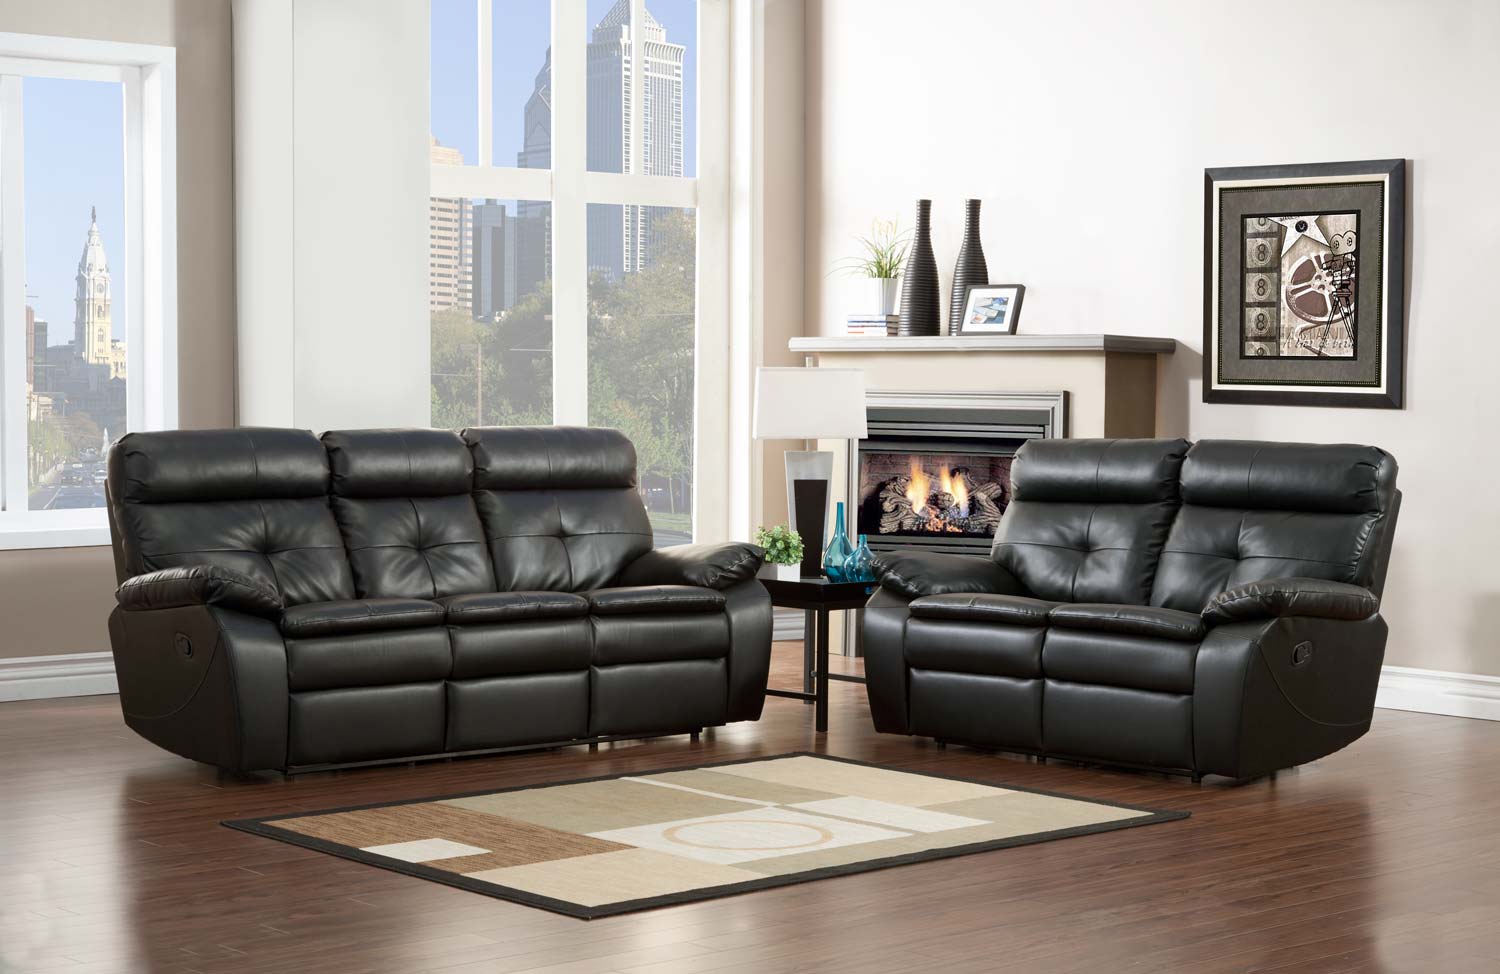 Homelegance Wallace Reclining Sofa Set - Black - Bonded Leather Match